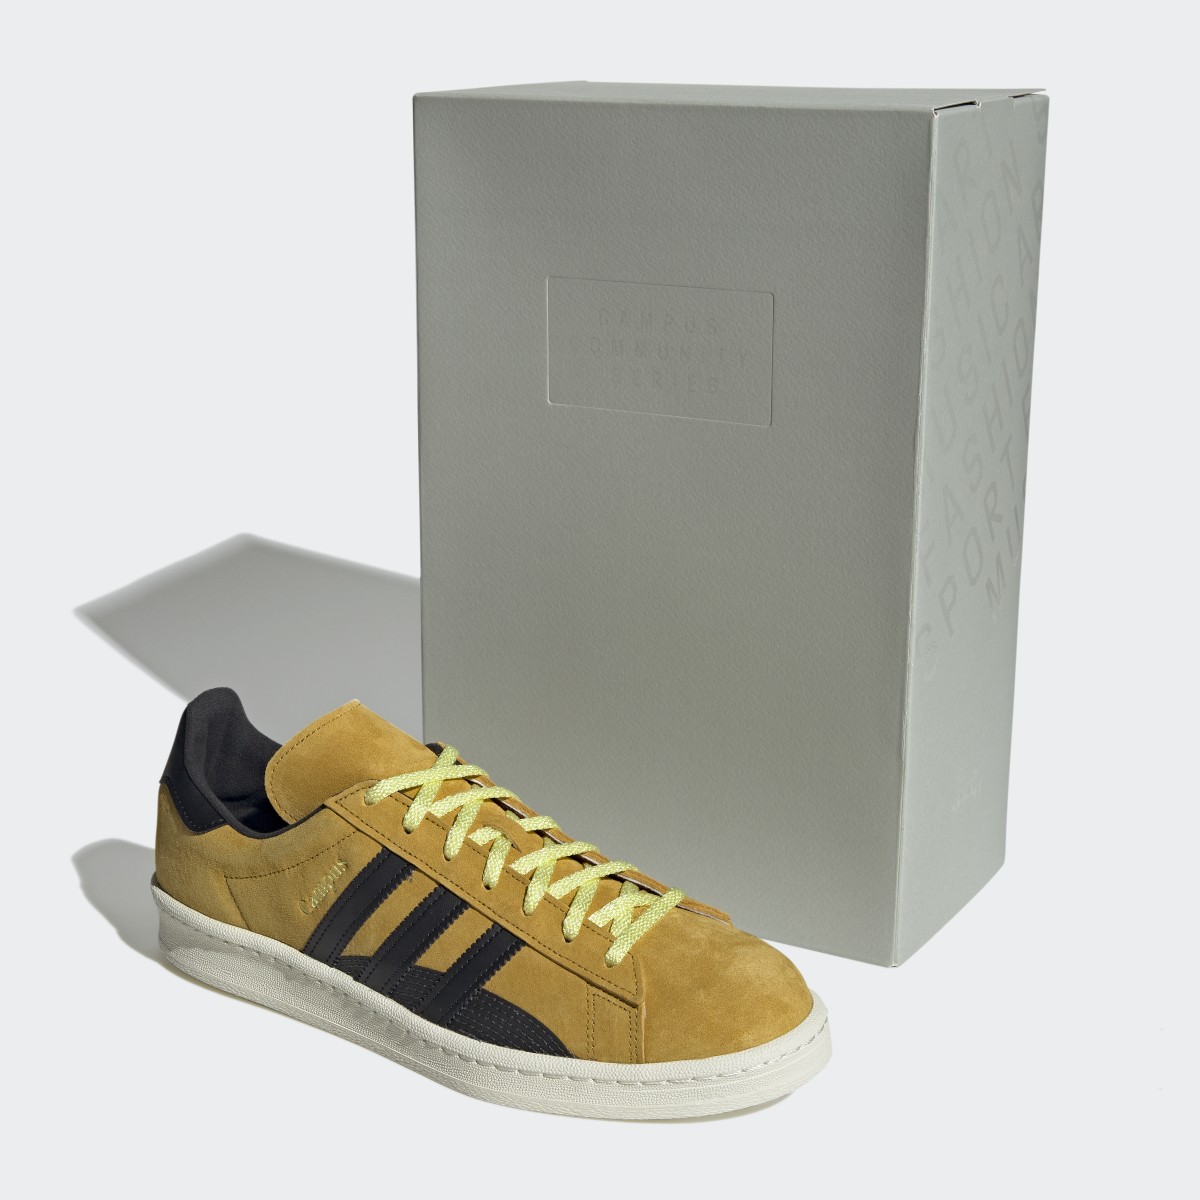 Adidas Campus 80s Shoes. 4